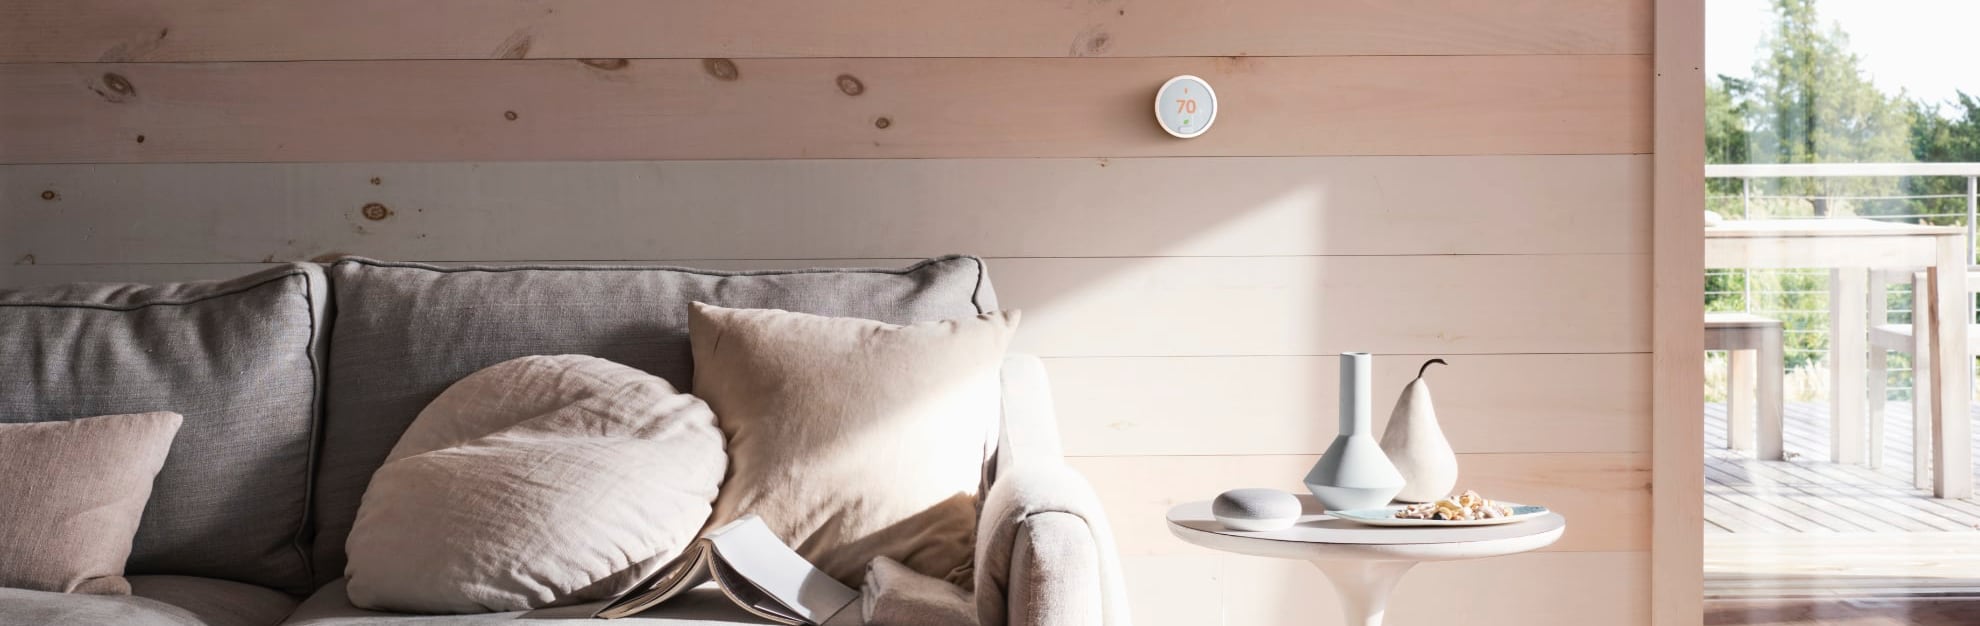 Vivint Home Automation in Mesa